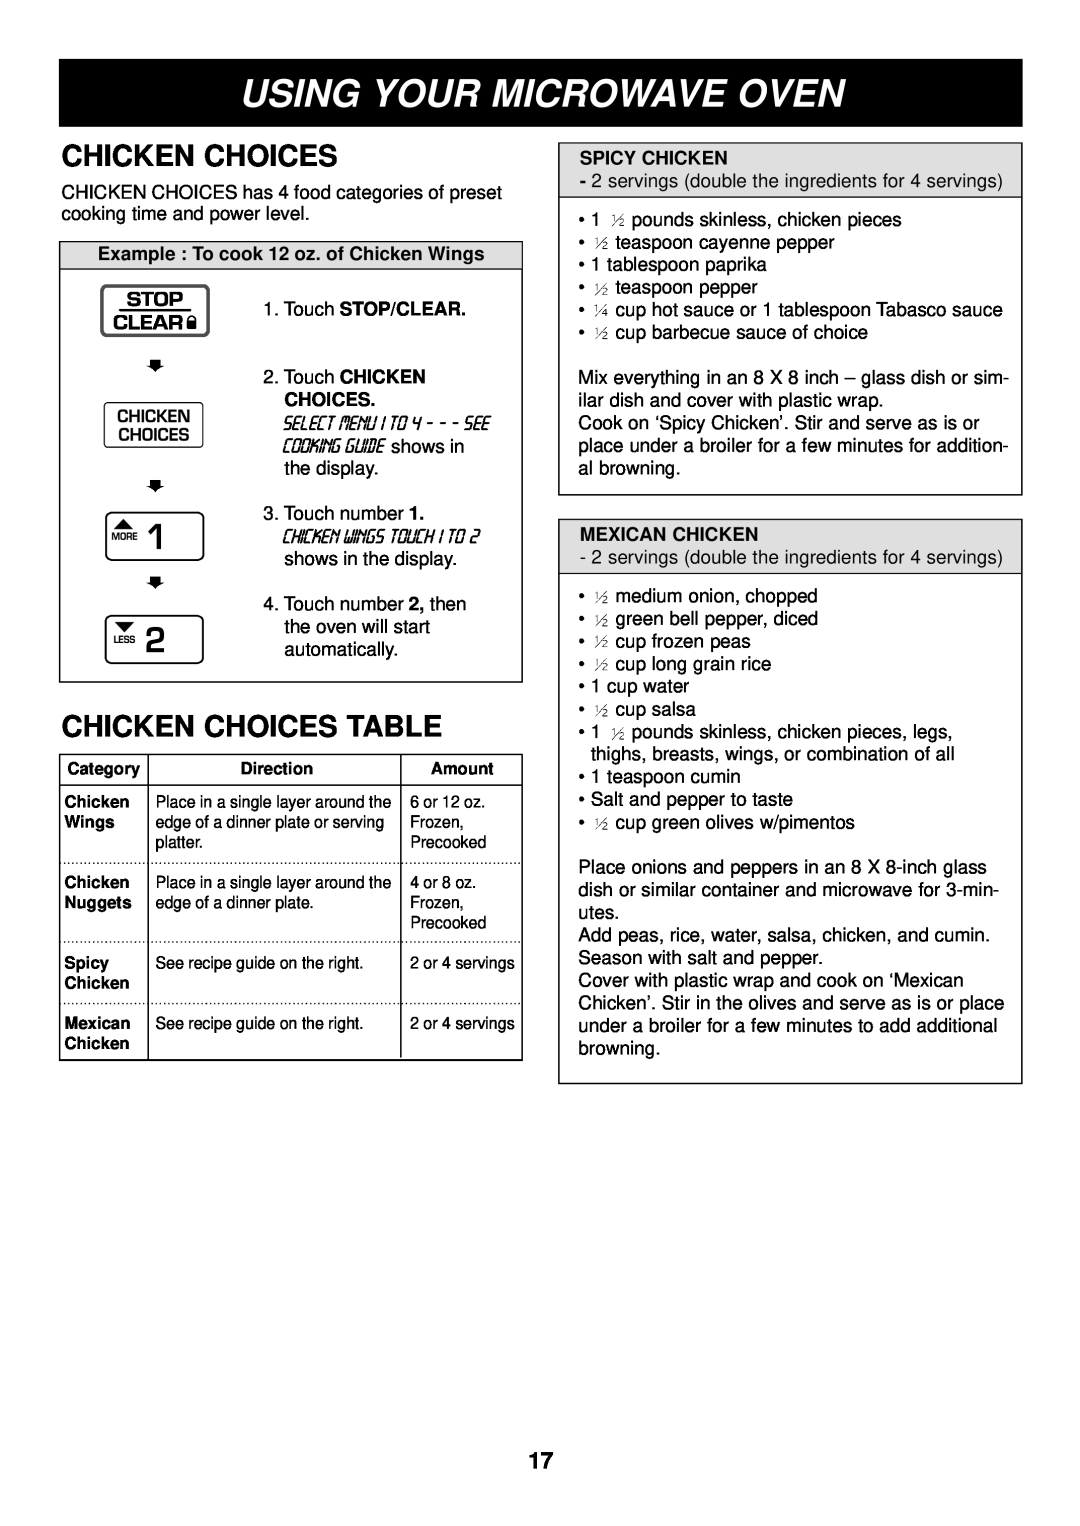 LG Electronics LRM1230B manual Chicken Choices Table, Using Your Microwave Oven, Touch CHICKEN CHOICES, Spicy Chicken 